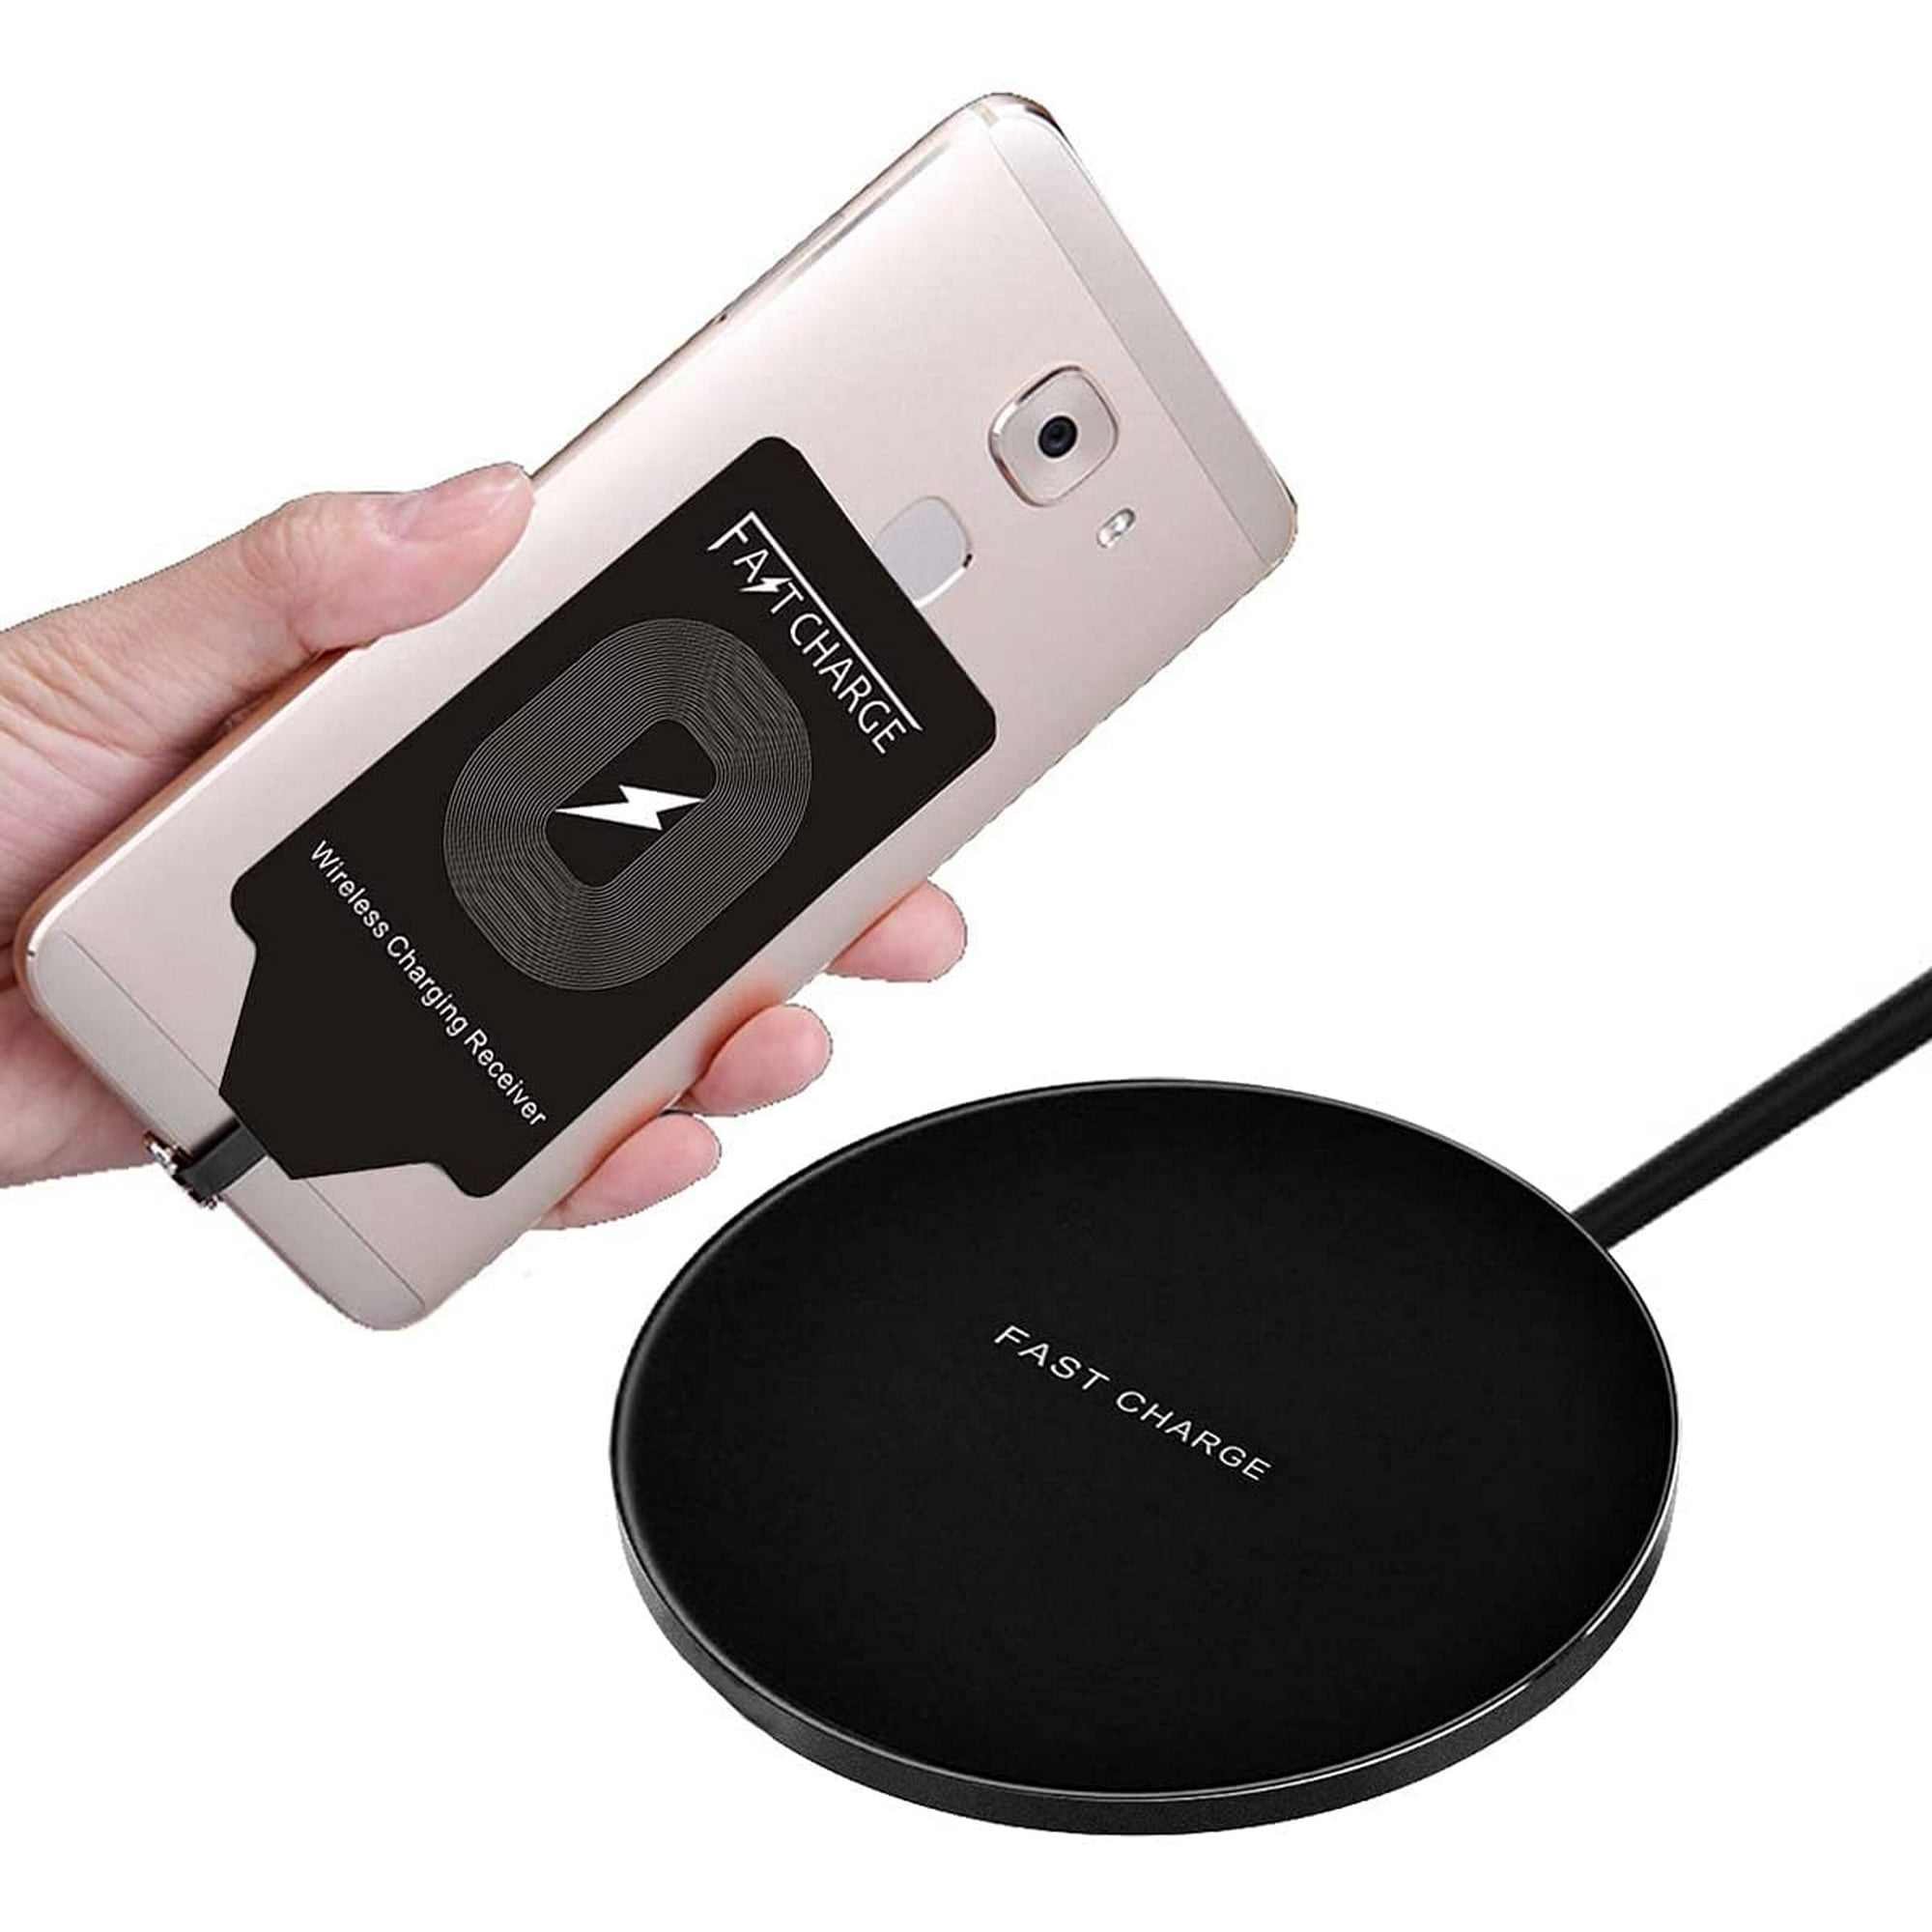 Fast Qi Wireless Charger USB Type C Charging Receiver Kit for LG Stylo 4 V20 G5 Google Pixel 2 XL Samsung A8 C9 pro A3 Plus Moto G6 Z2